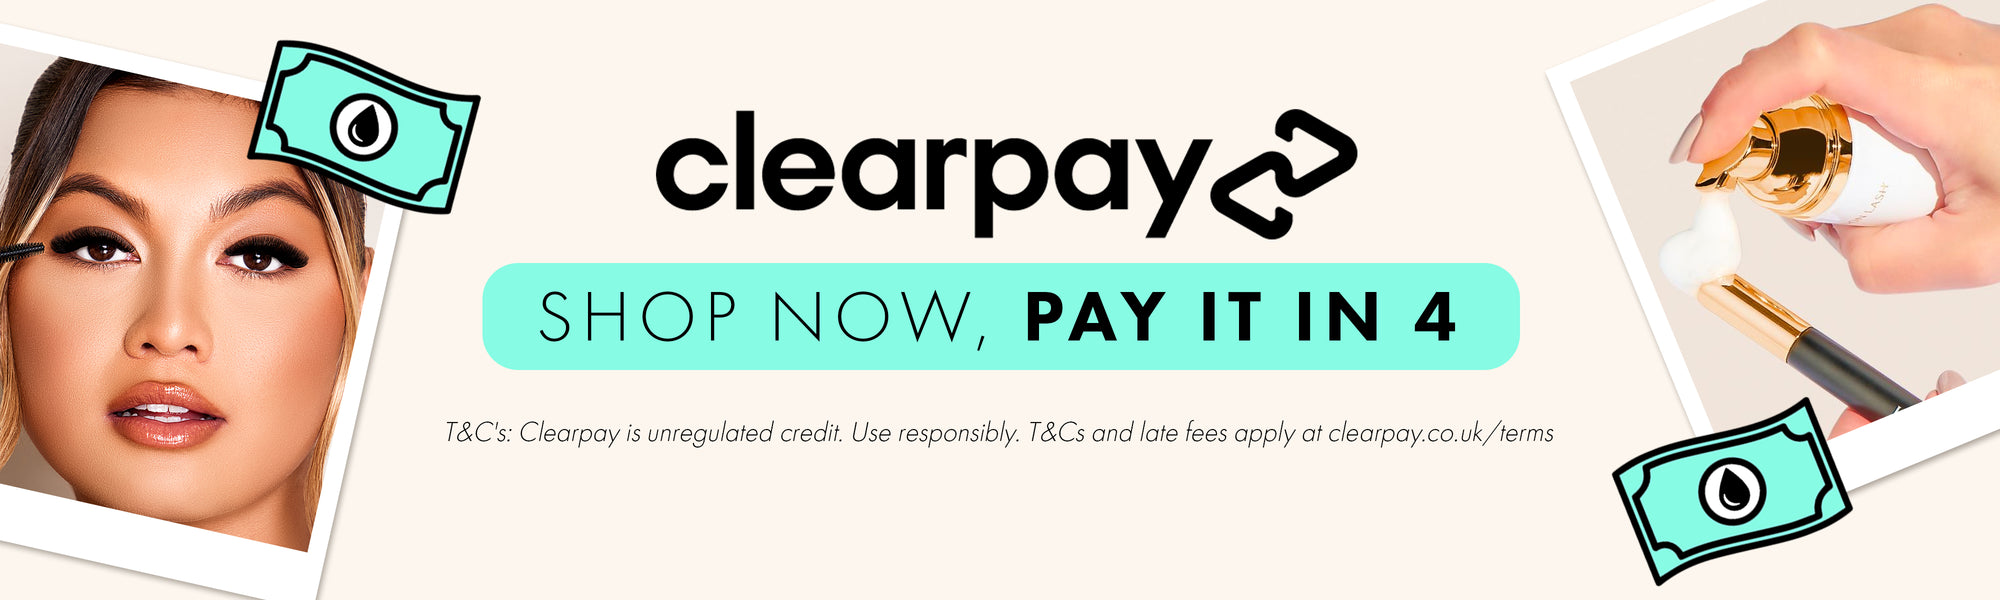 Clearpay FAQs